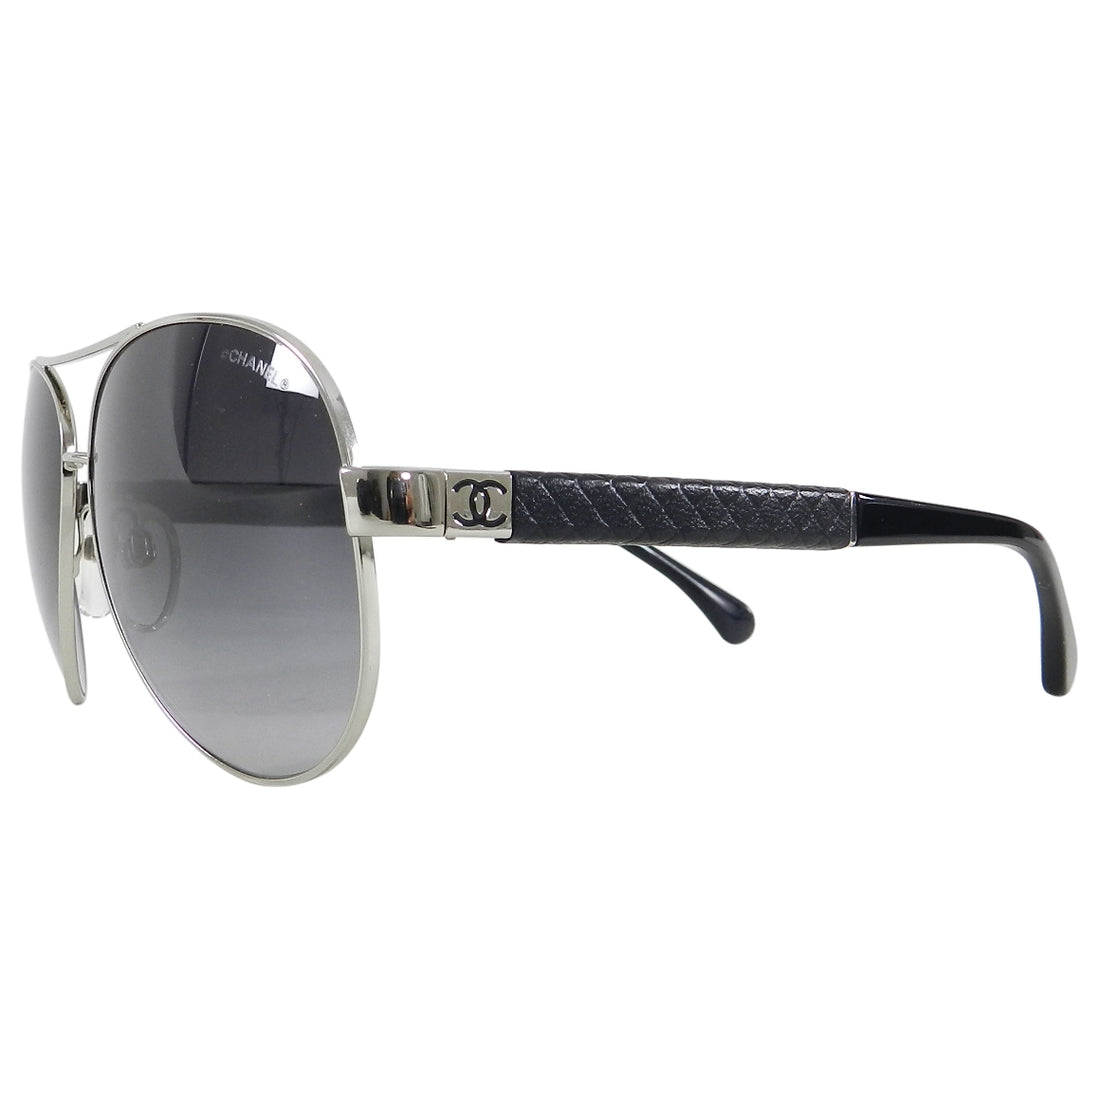 CHANEL Lambskin Quilted CC Aviator Sunglasses 4195-Q White Silver